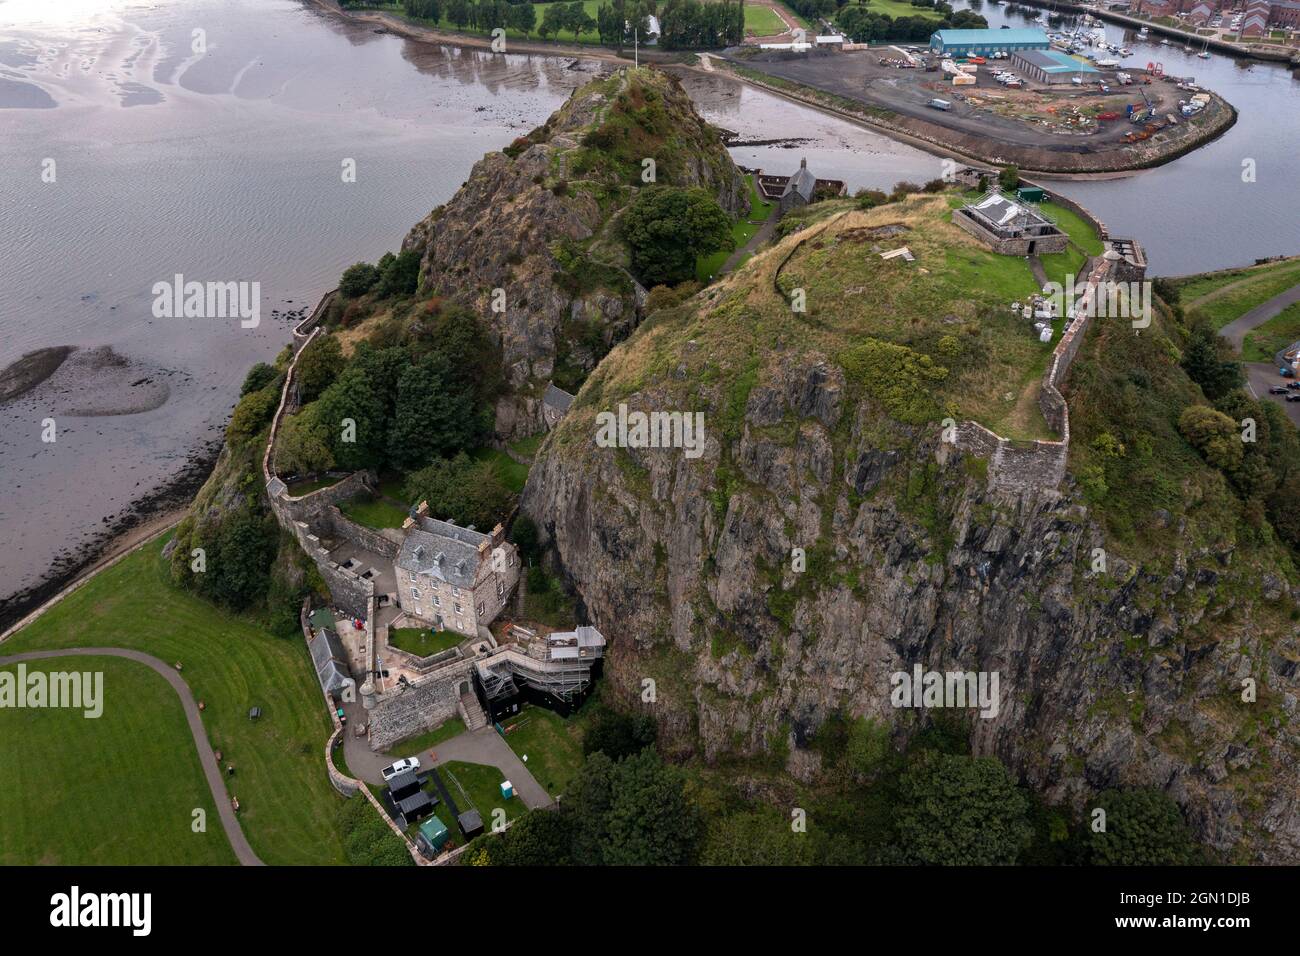 Dumbarton Castle, Dumbarton Rock, Dumbarton, Scotland, UK. 21 September 2021 PICTURED: Dumbarton Castle. At COP26, Scottish Heritage will demonstrate how the historic environment and cultural heritage are part of the solution to tackling the climate emergency. This is also an opportunity to showcase the quality and innovation of the historic environment in Scotland. They are focusing on Communities; Climate Impacts; Sustainable Tourism; Circular Economy. Dumbarton Castle has the longest recorded history of any stronghold in Scotland. Credit; Colin Fisher/Alamy Live News. Stock Photo